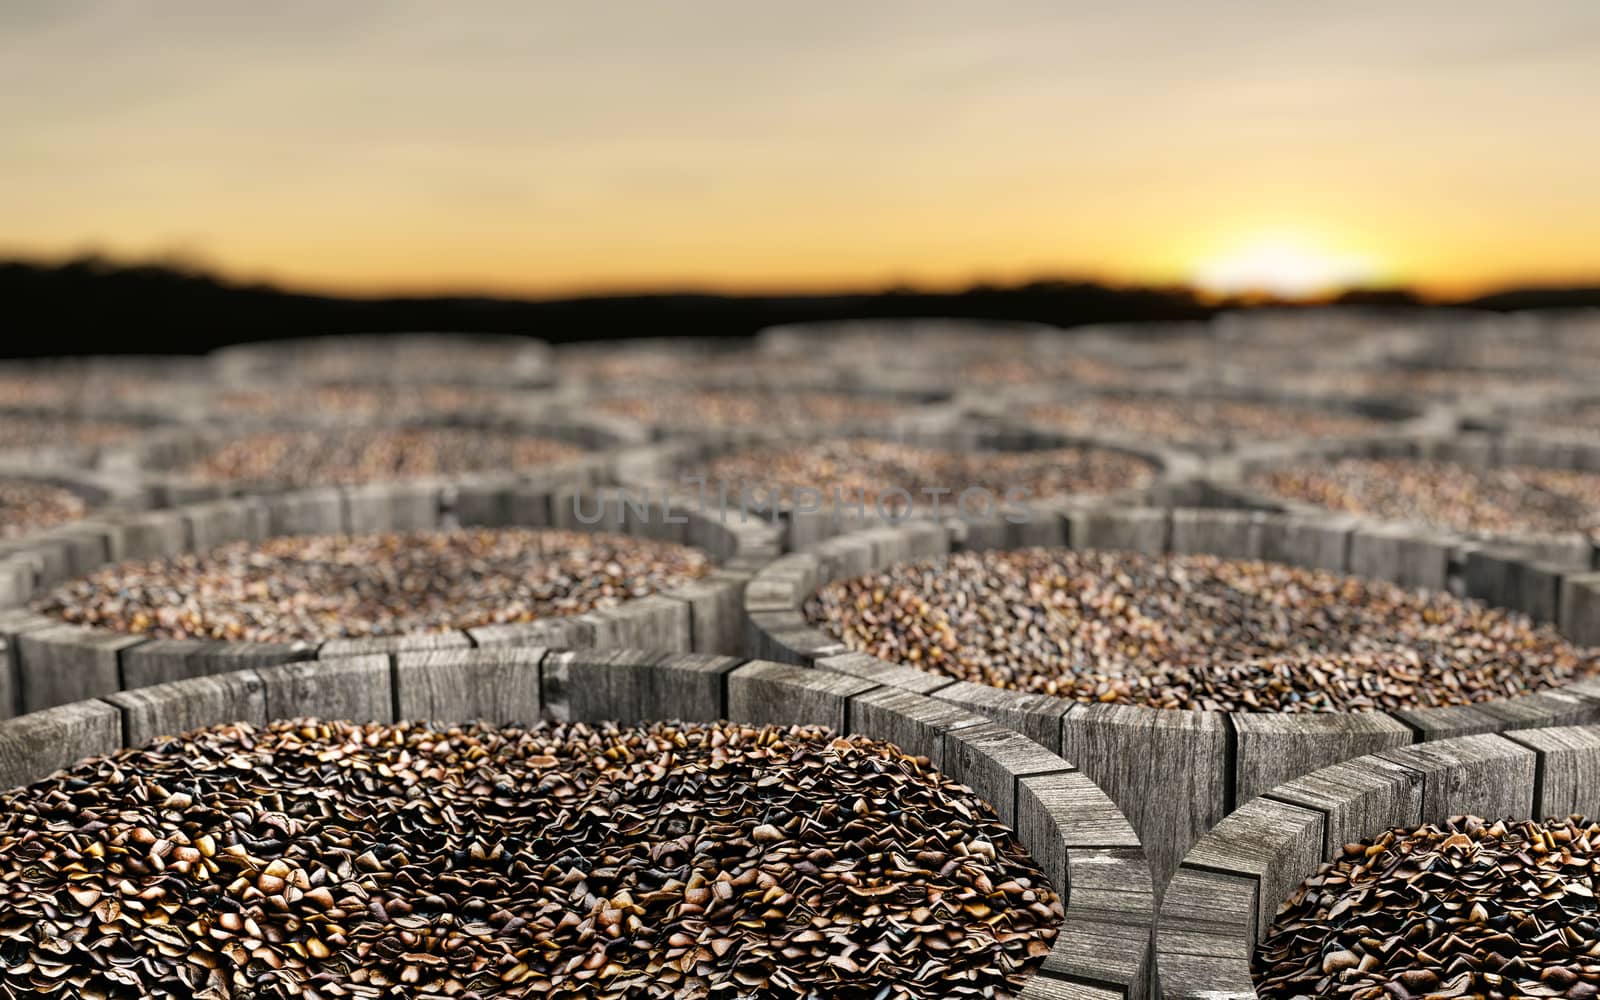 3d rendering of coffee beans in wooden barrel by F1b0nacci